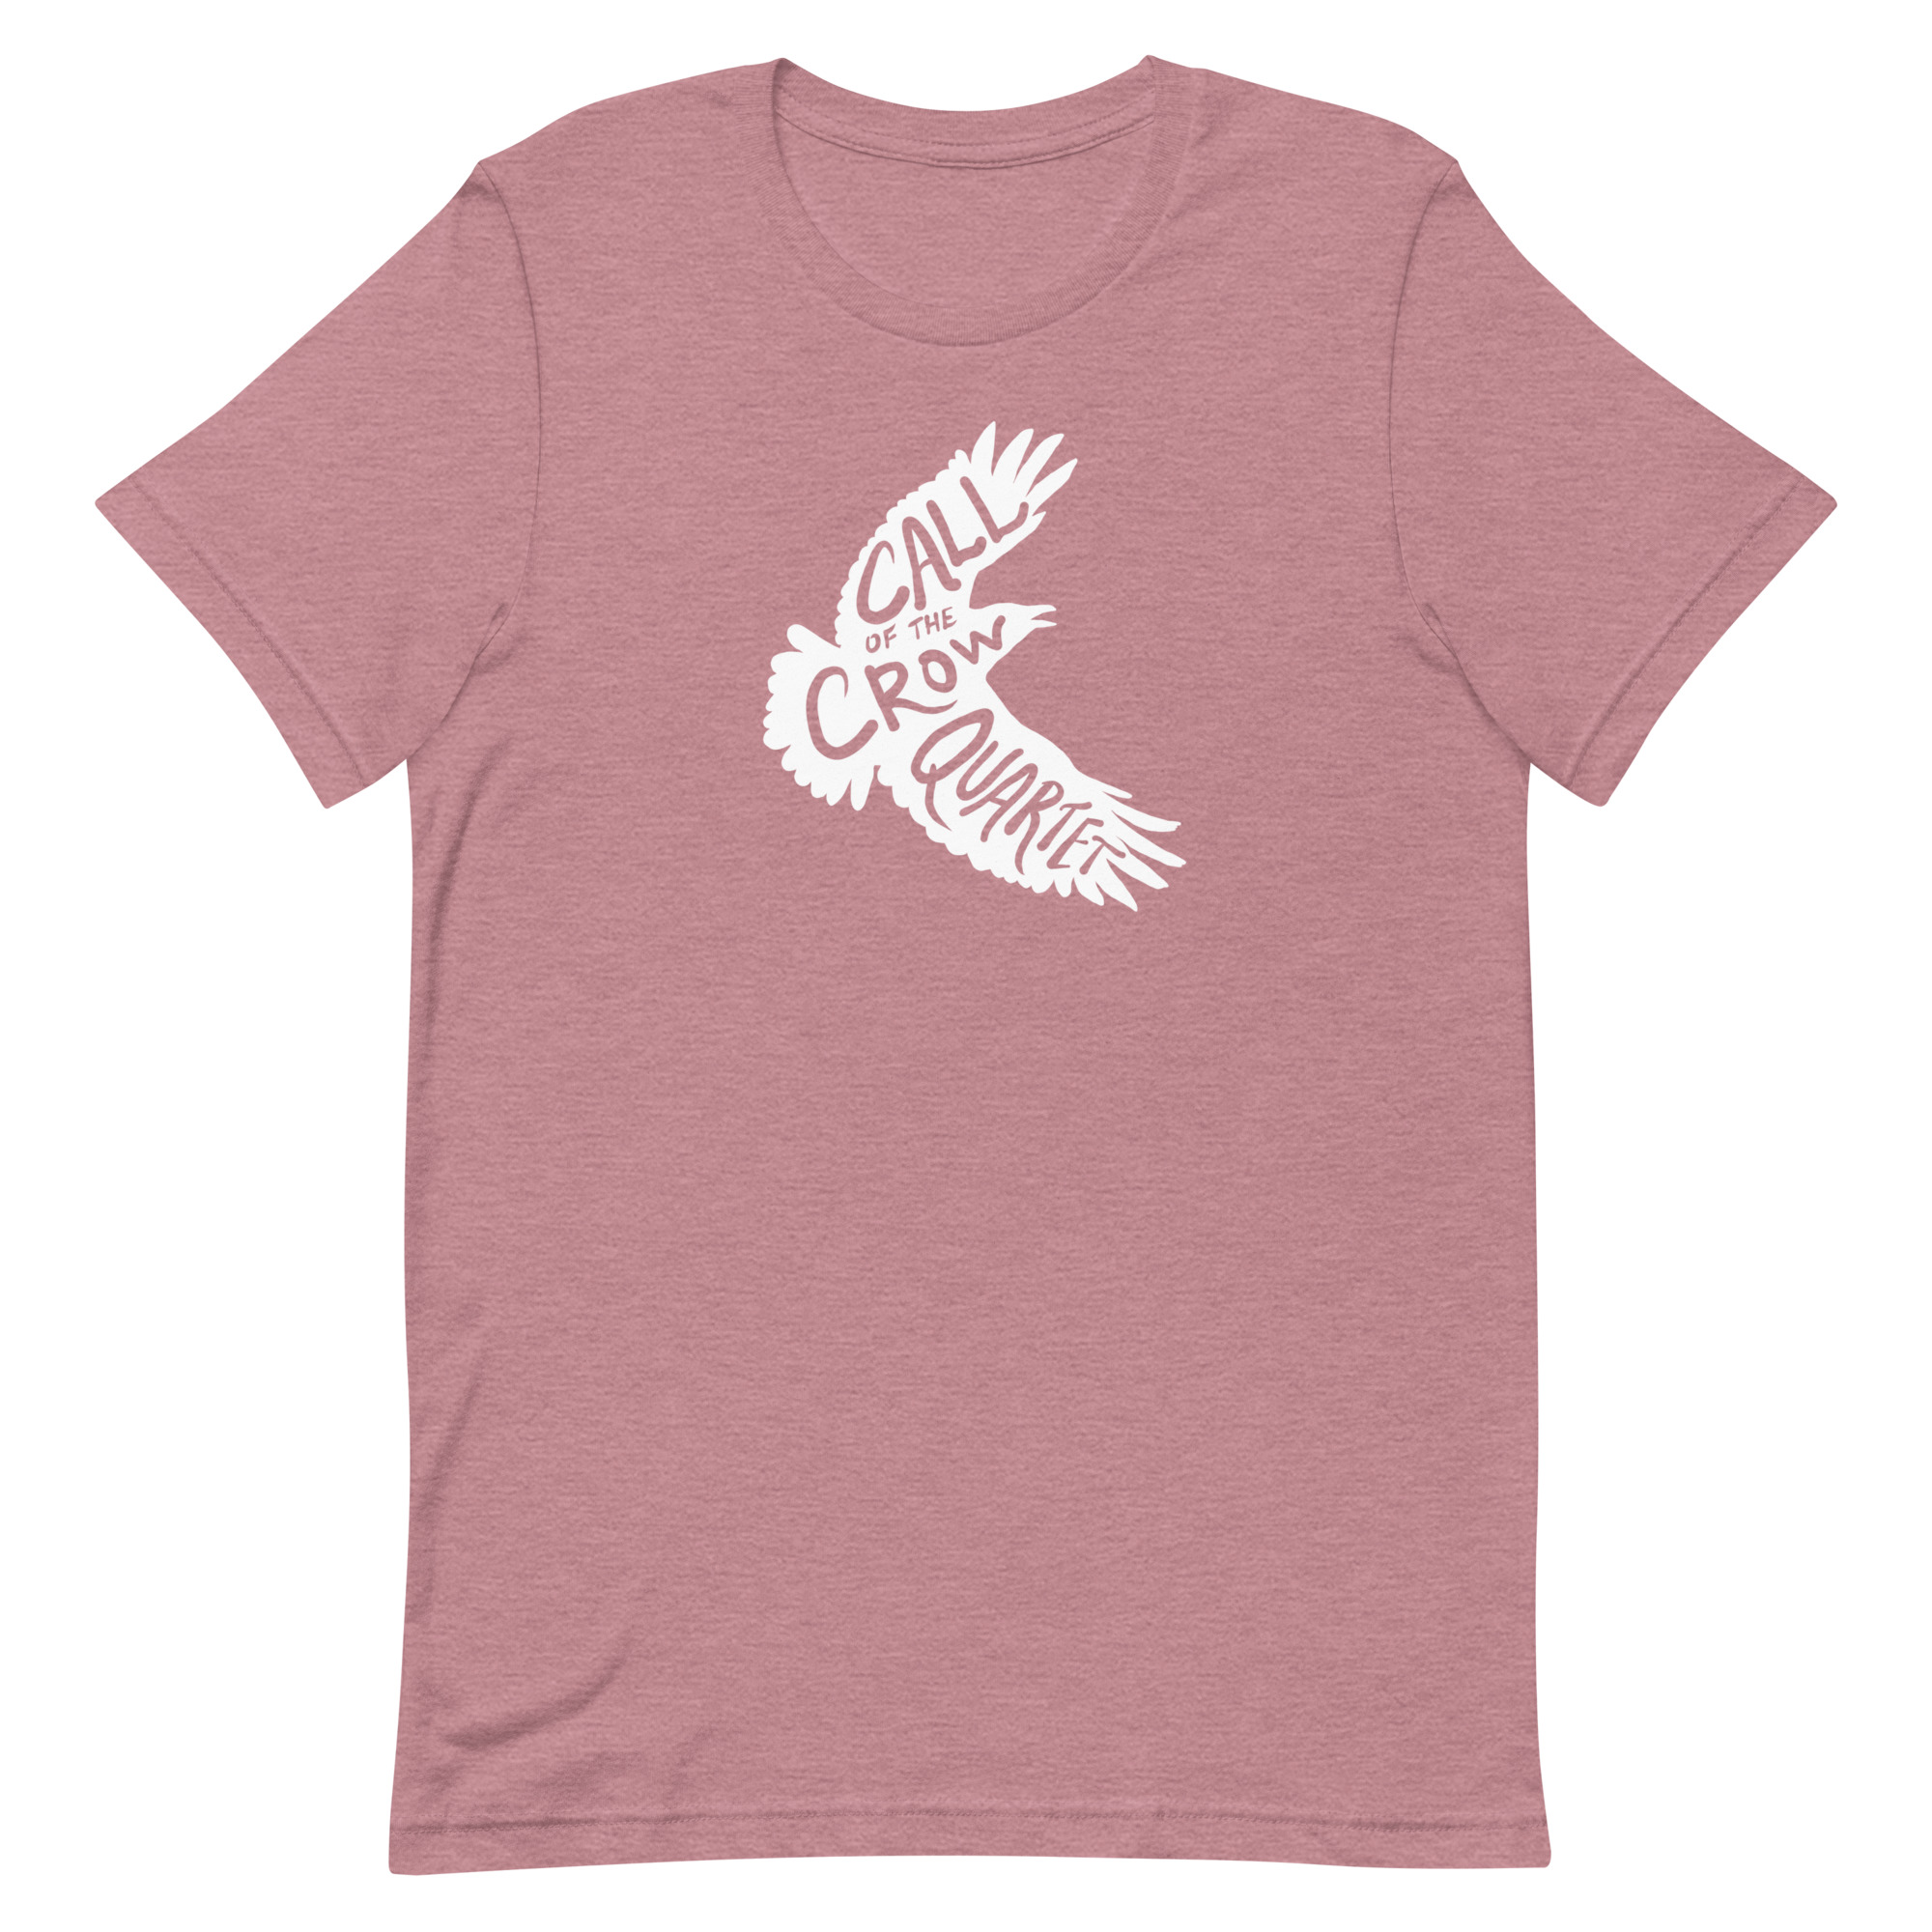 Heather orchid (mauve/pink) short sleeve shirt with white crow silhouette filled with the words "Call of the Crow Quartet."